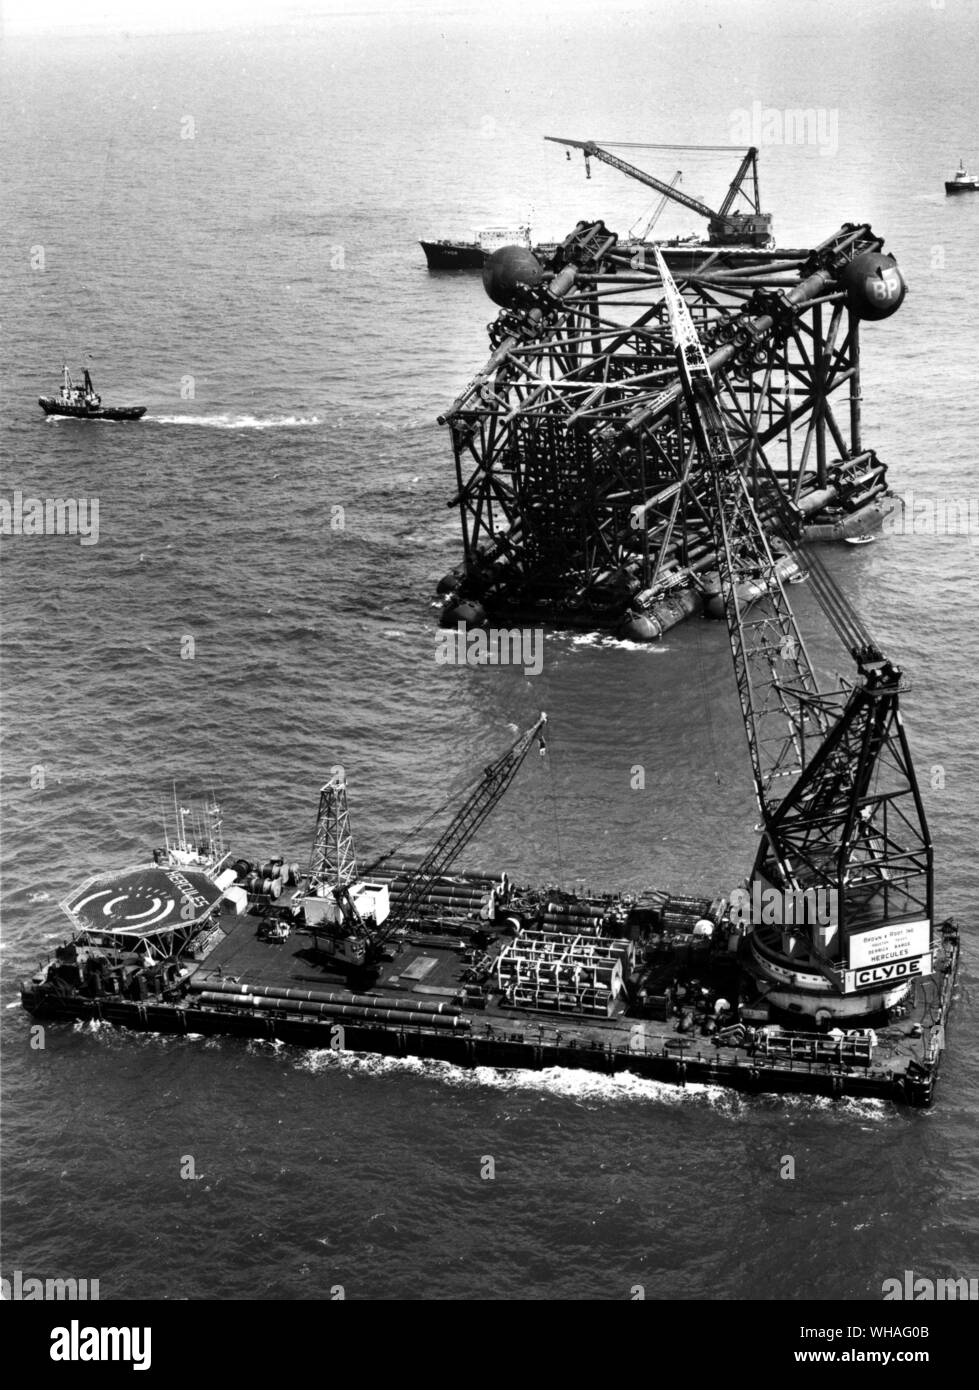 Jacket section of production platform 'Graythorp I' on site on BP's Forties oilfield in the North Sea, before lowering to the sea bed, with crane barge 'Hercules' in foreground. July 1974 Stock Photo